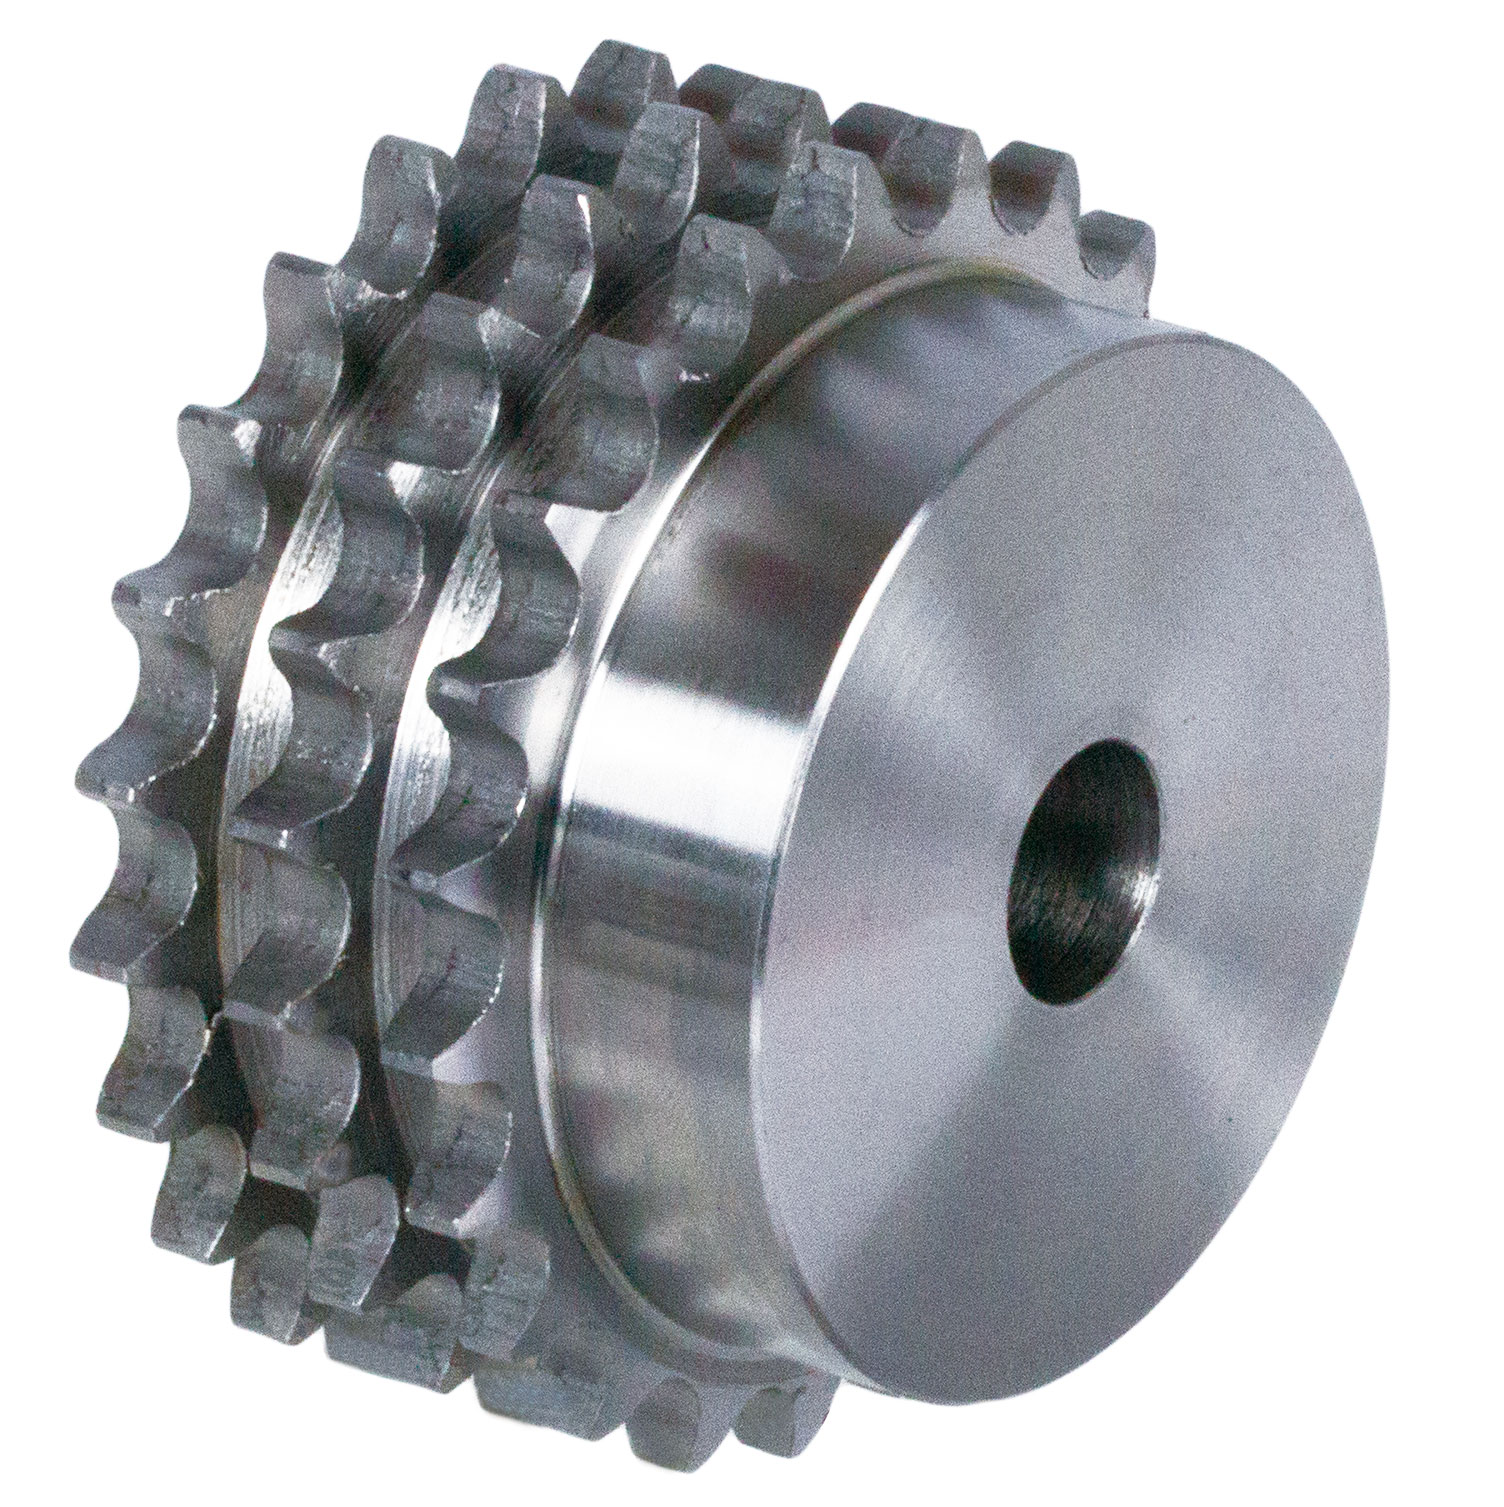 Bevel Gears Archives - Maedler North America